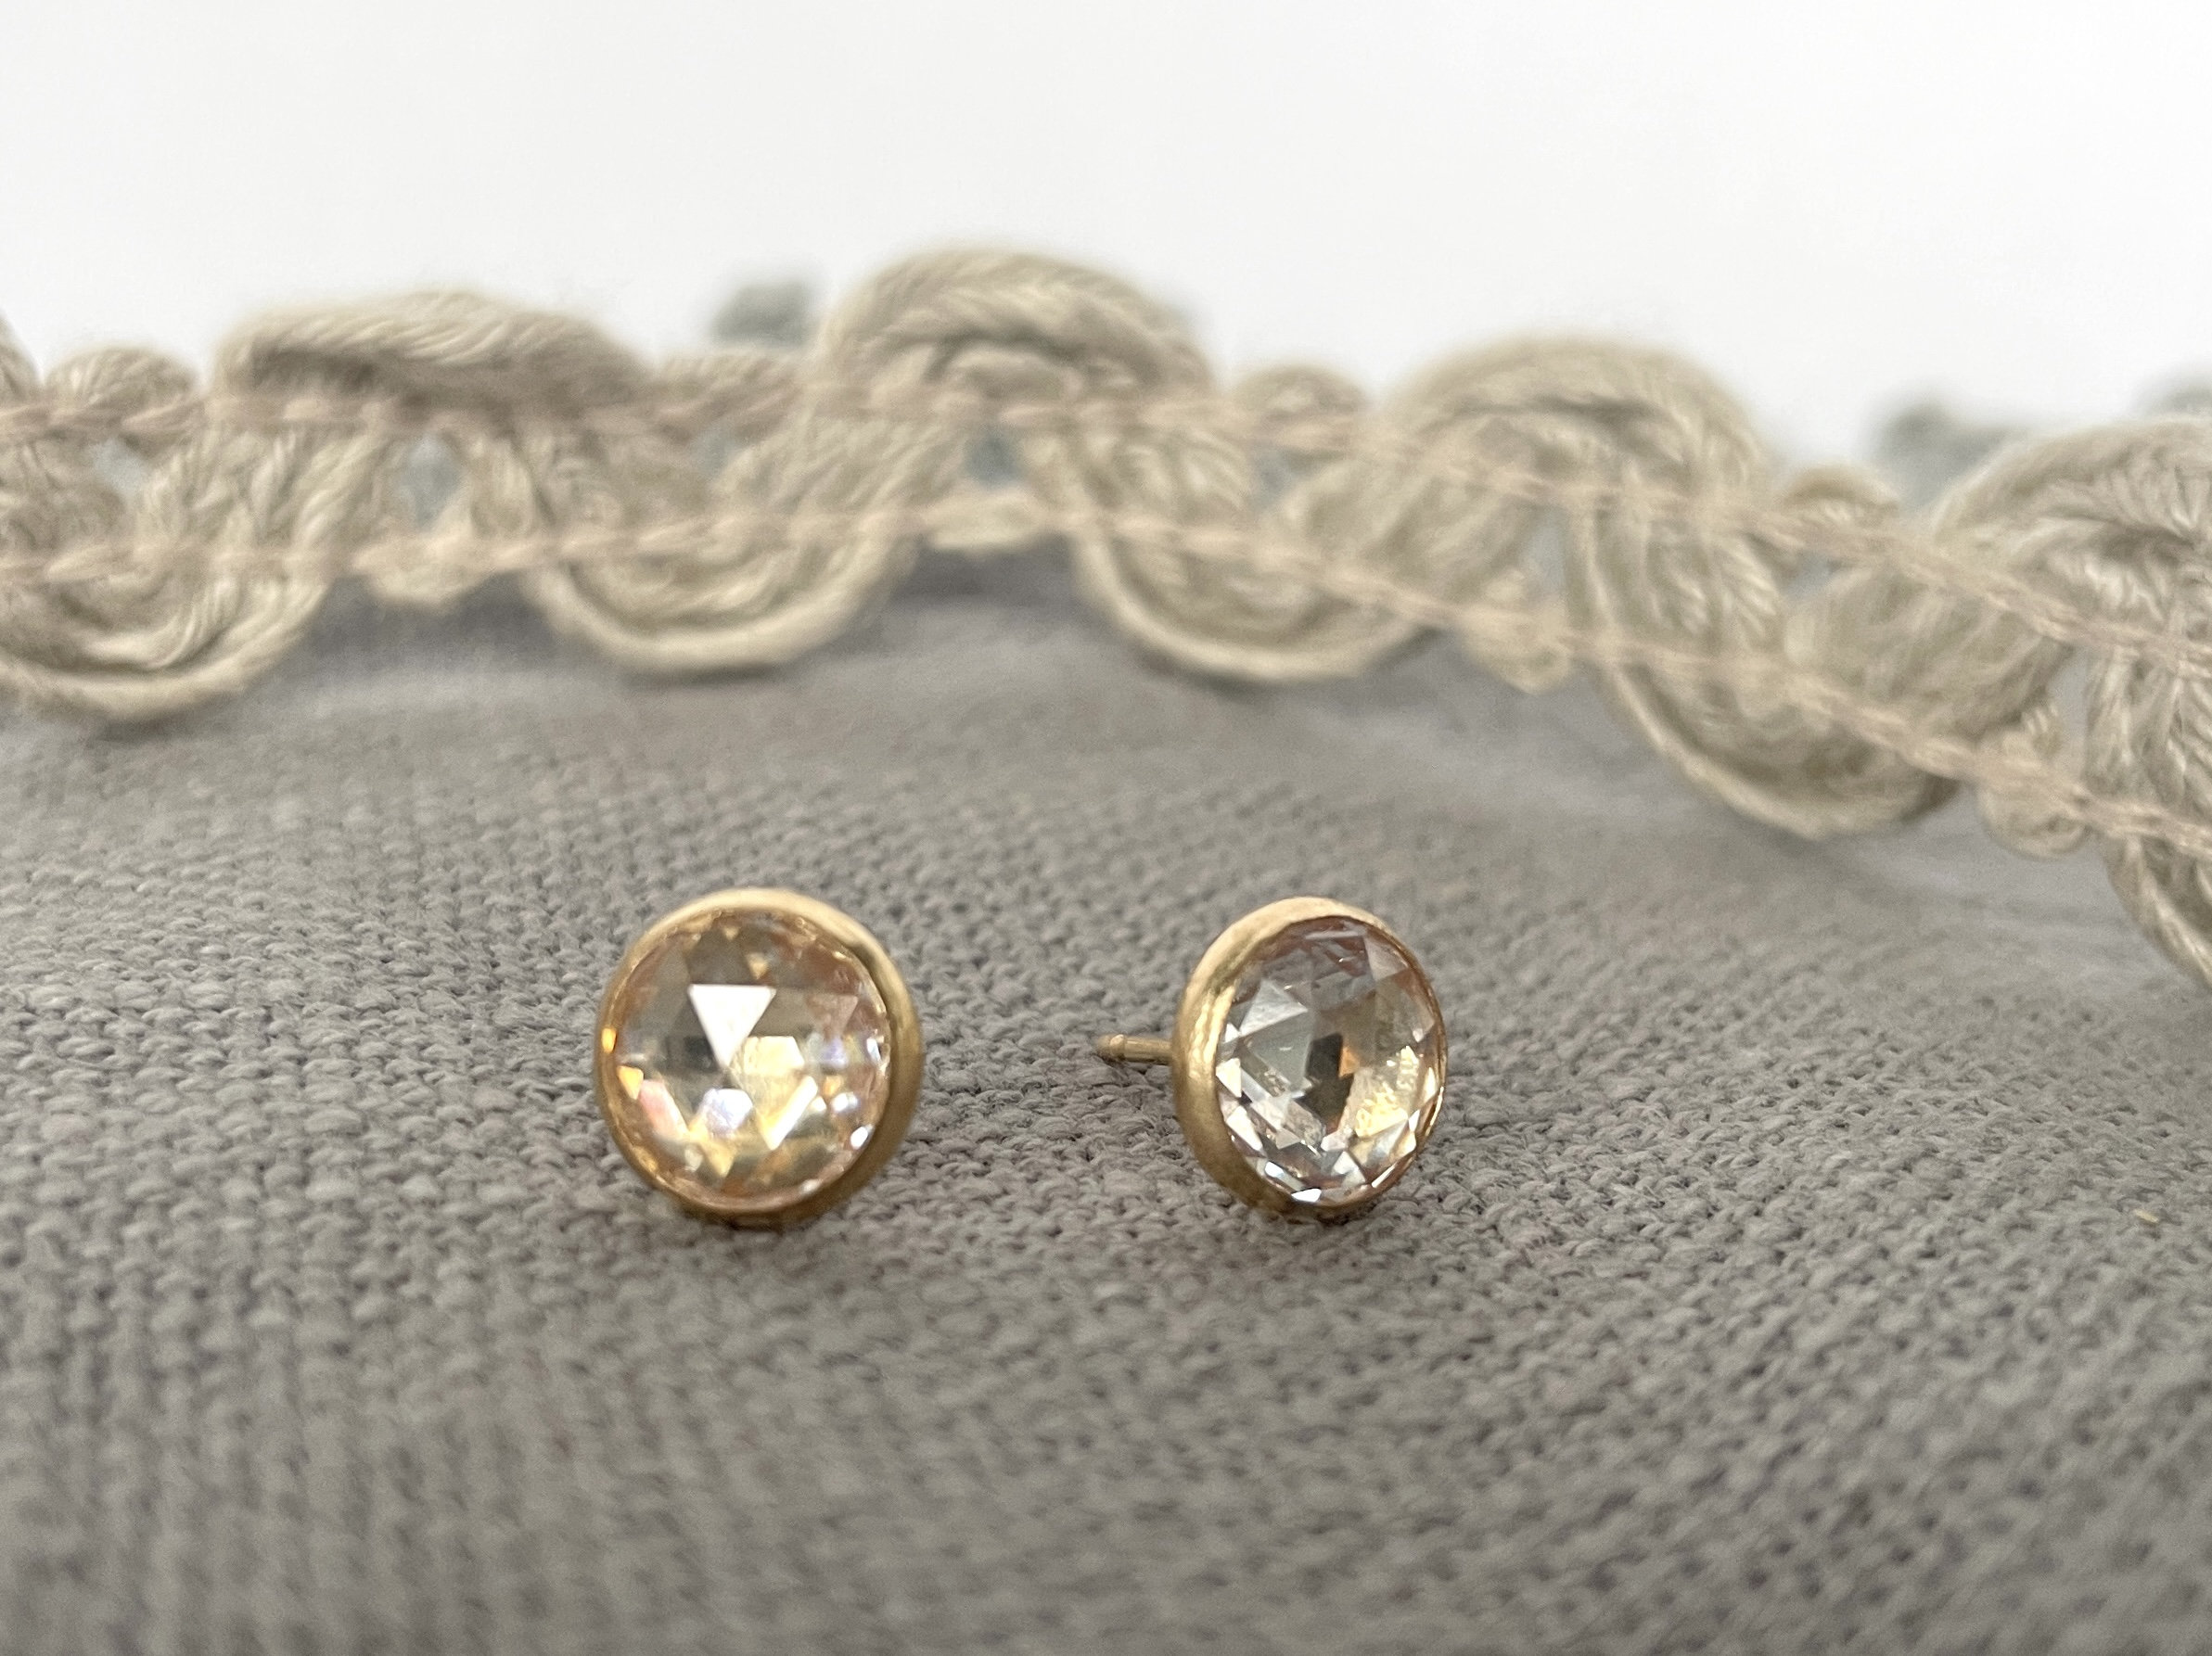 14K Yellow Gold and Cubic Zirconia Stud Earrings, Silicone Pushback 2.5mm